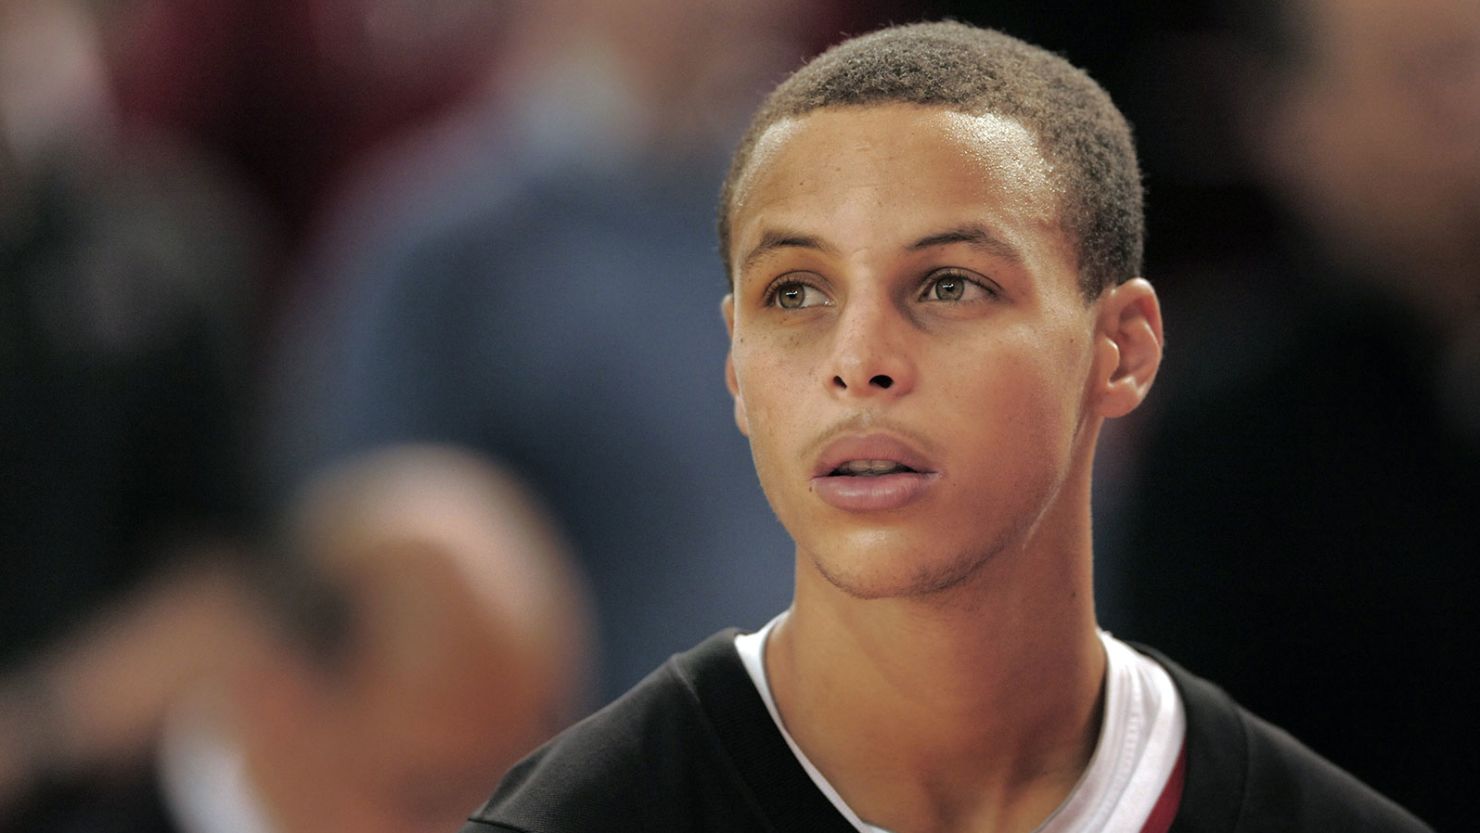 Stephen Curry during his college days at Davidson in "Stephen Curry: Underrated."